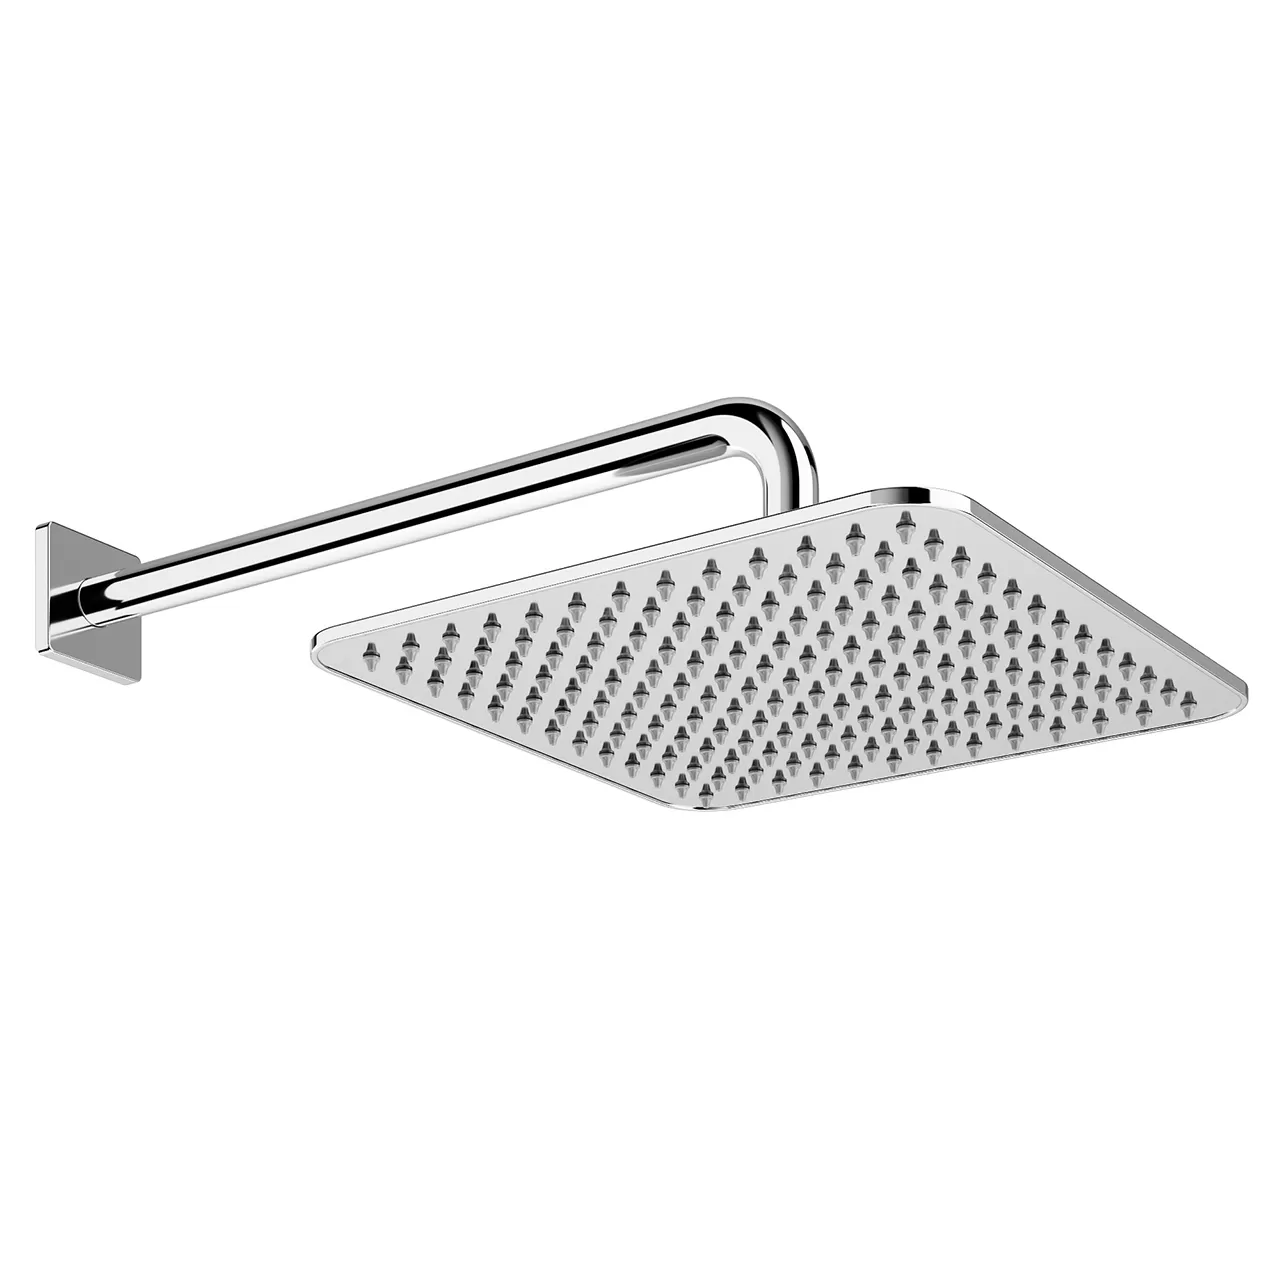 Bathroom – wall-square-rain-shower-head-302-and-353-mm-by-laufen